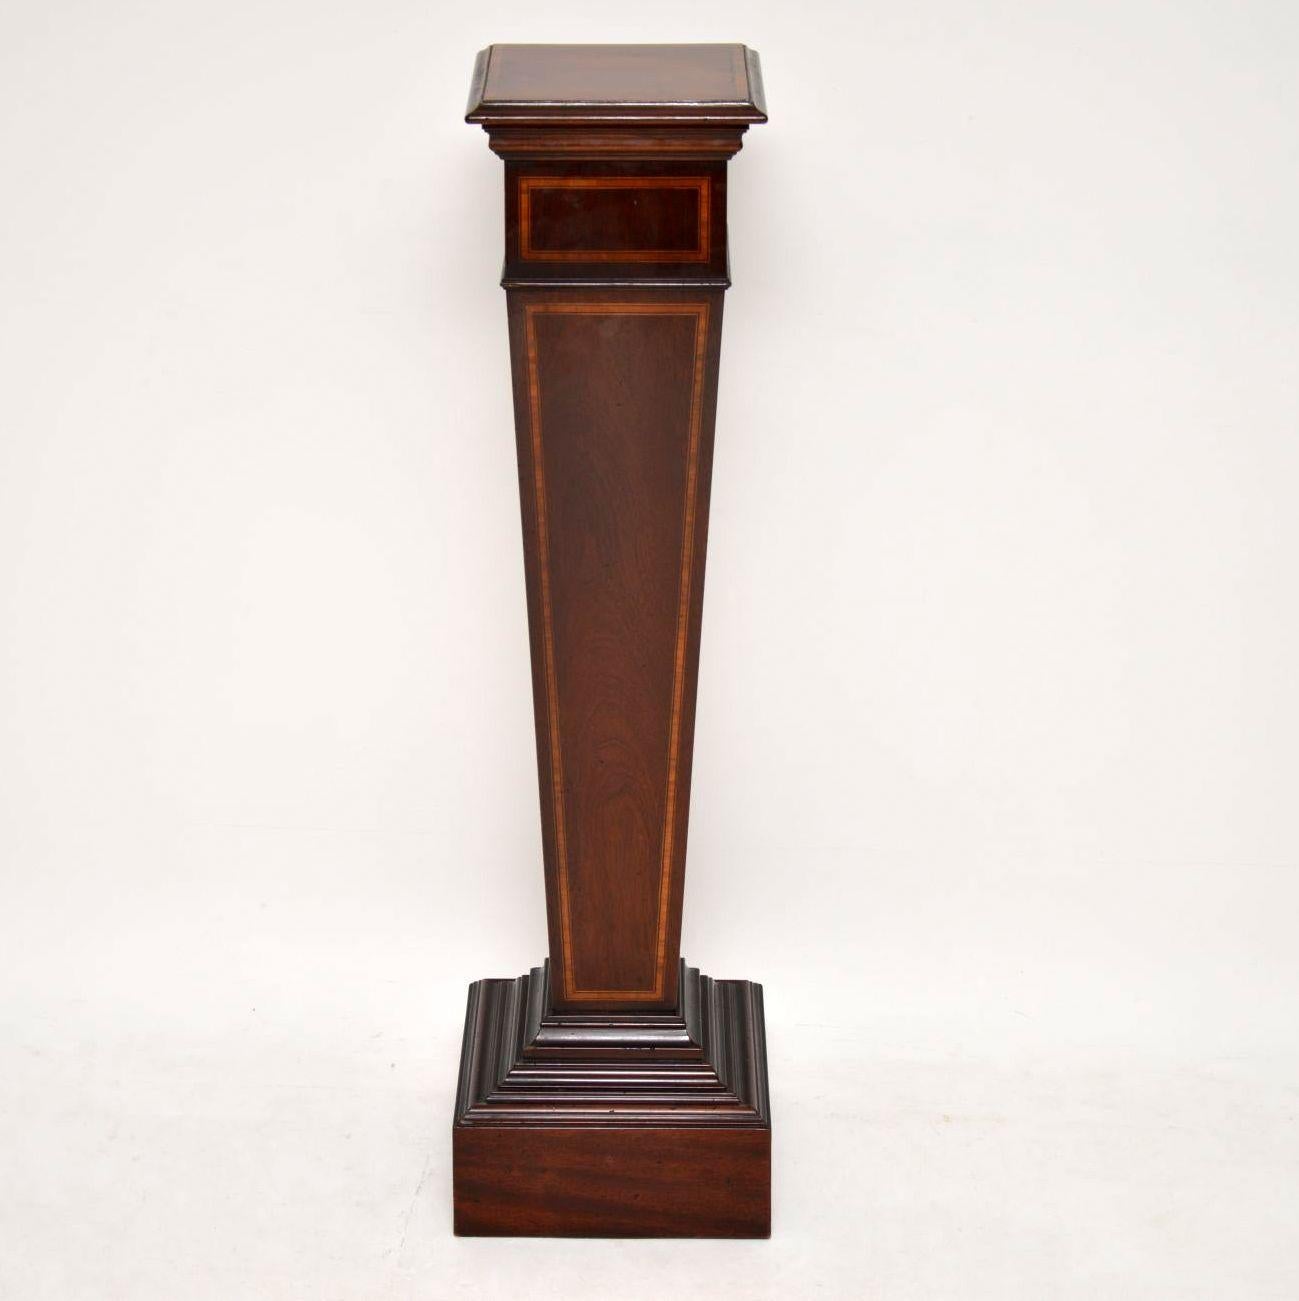 Antique Edwardian mahogany column with strong satinwood inlays. It’s in good original condition and would be perfect as a stand for a large statue or bust. The top also has satinwood banding. This stand dates to around the 1890-1910